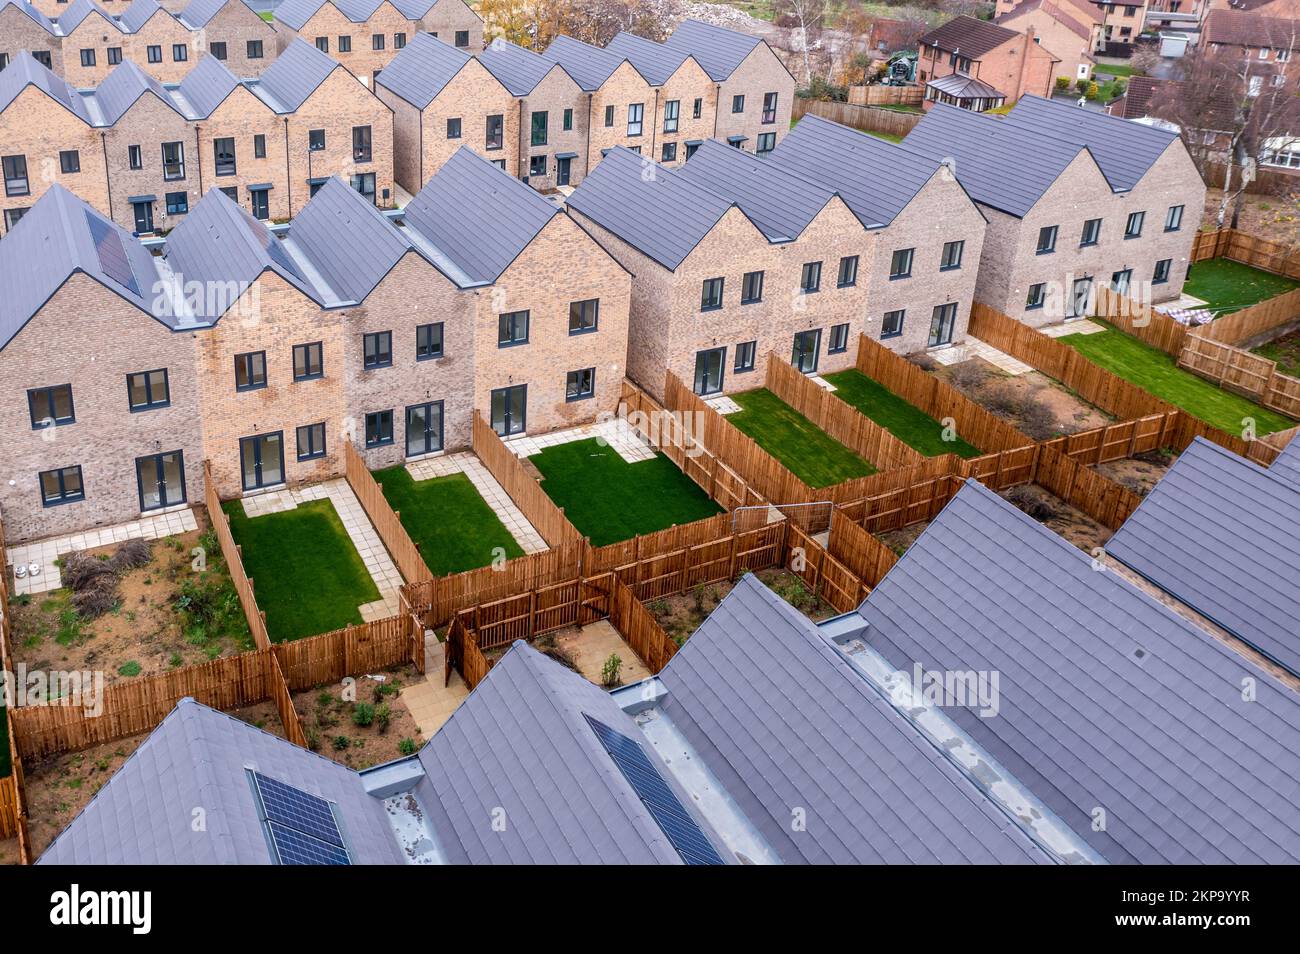 Aerial view of rows of energy efficient new build modular terraced houses in the UK with characterless design for first time buyers Stock Photo